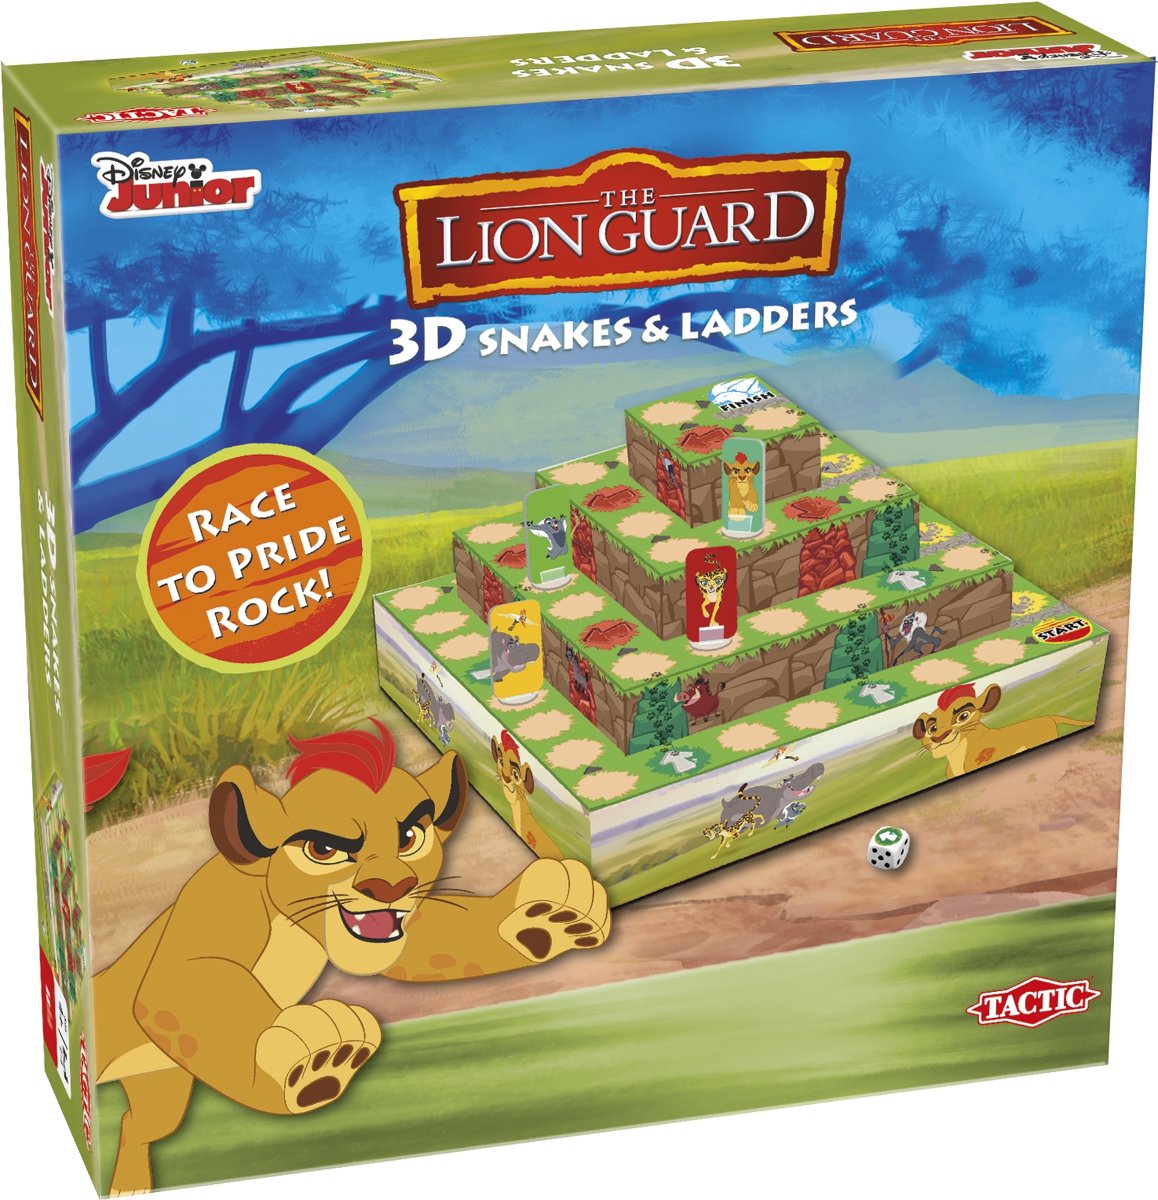 Lion Guard 3D Snakes & Ladders Game